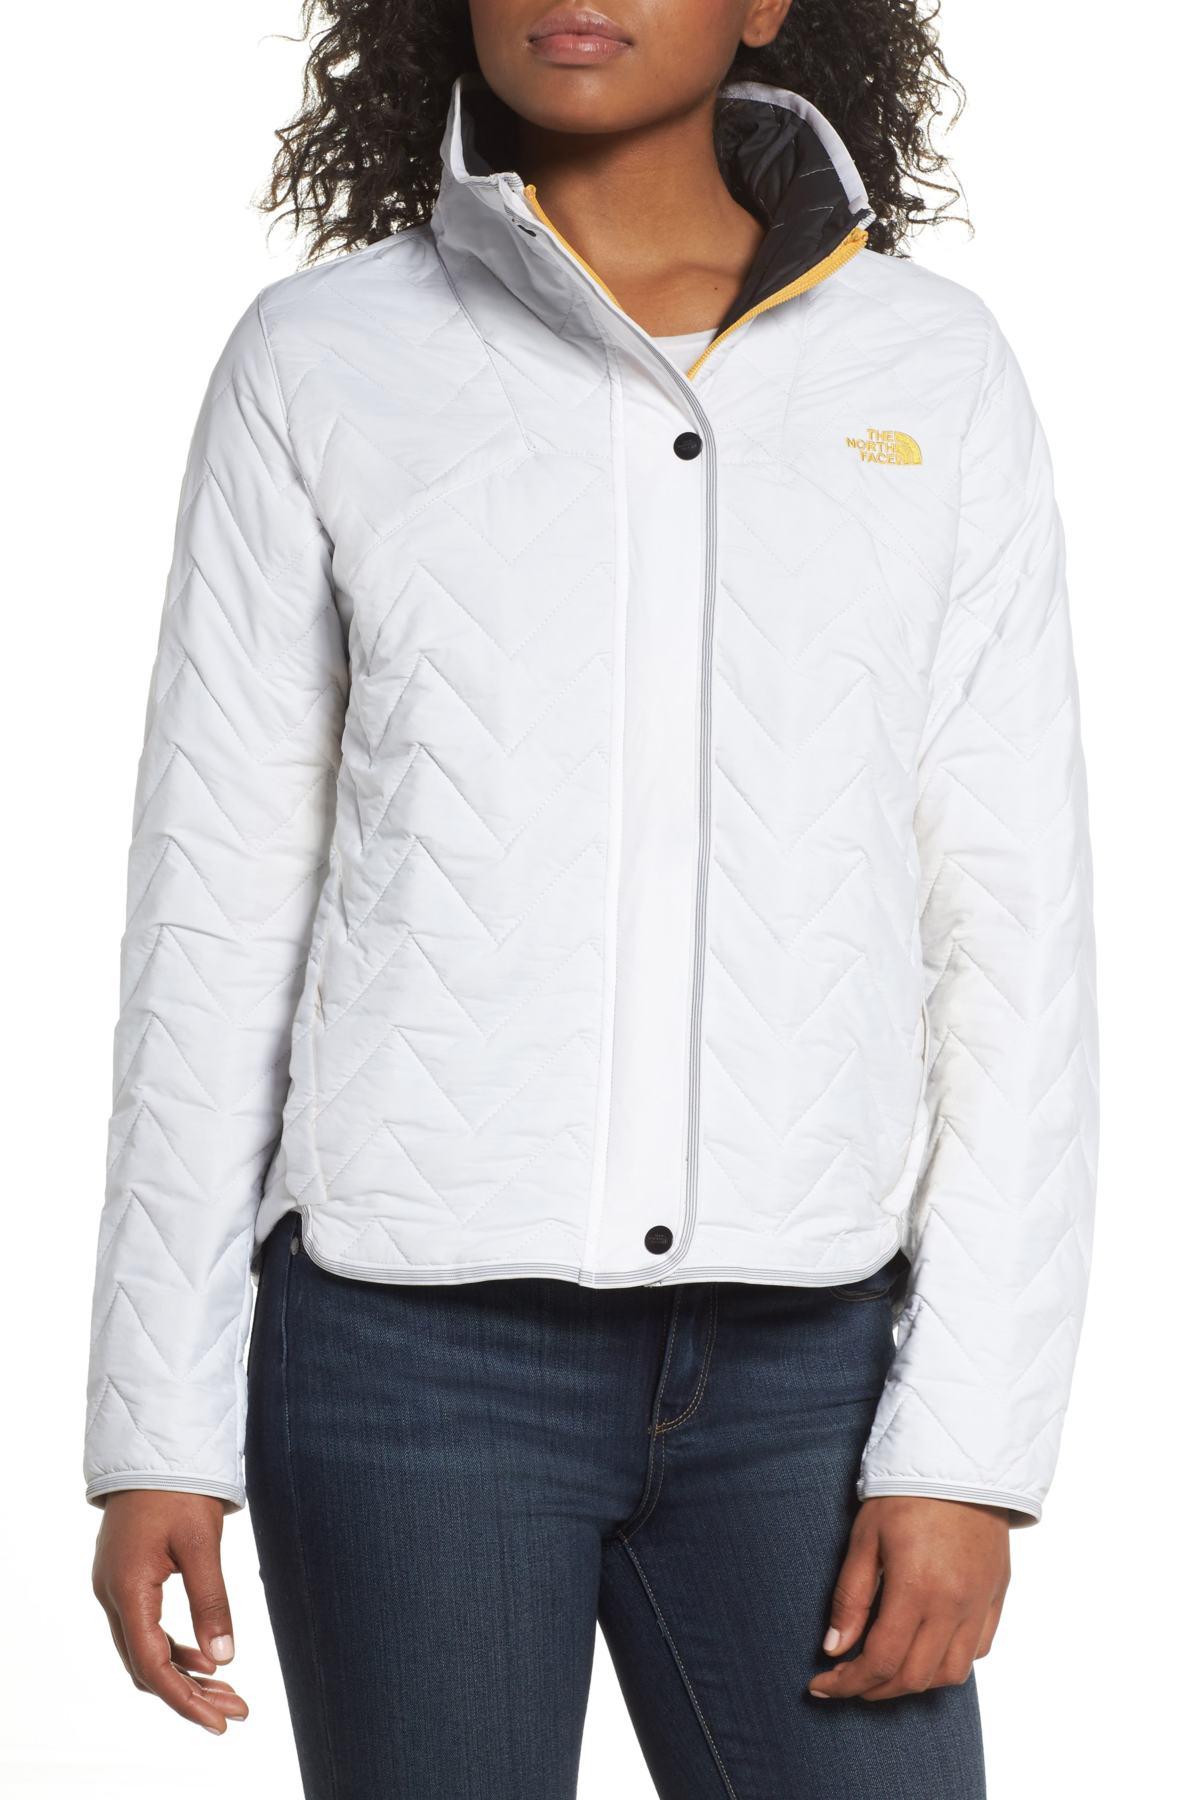 The North Face Westborough Insulated Jacket in White - Lyst